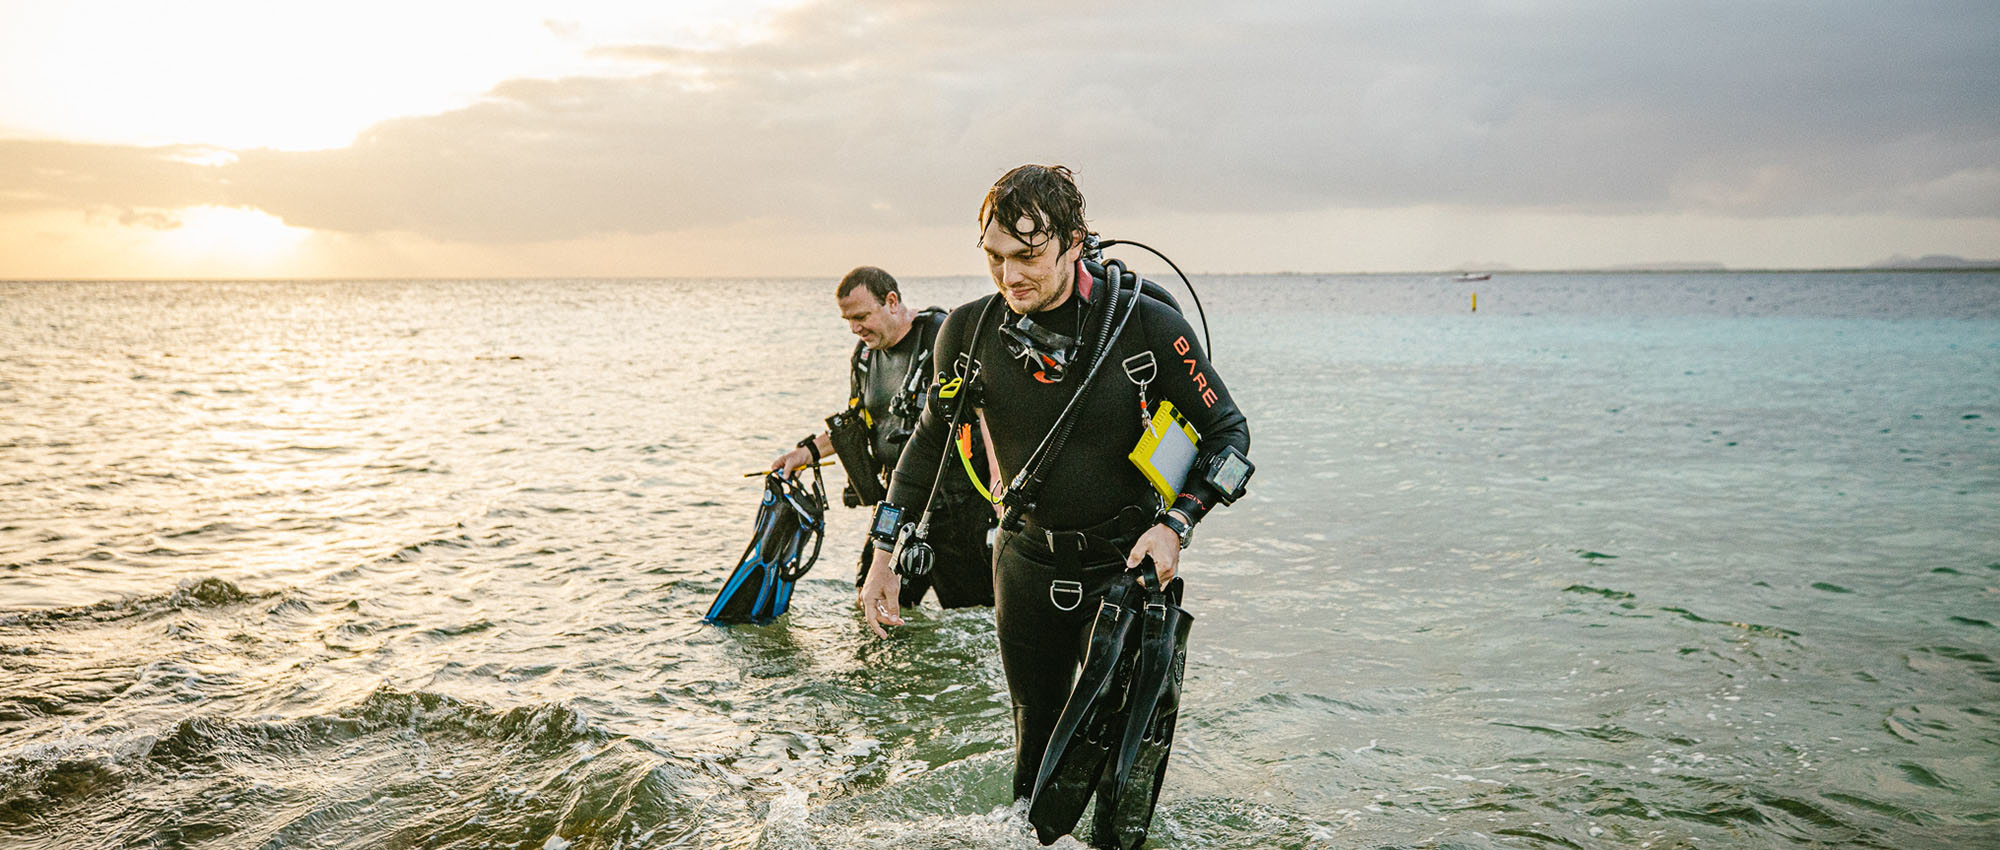 Two men in scuba gear getting out of the water